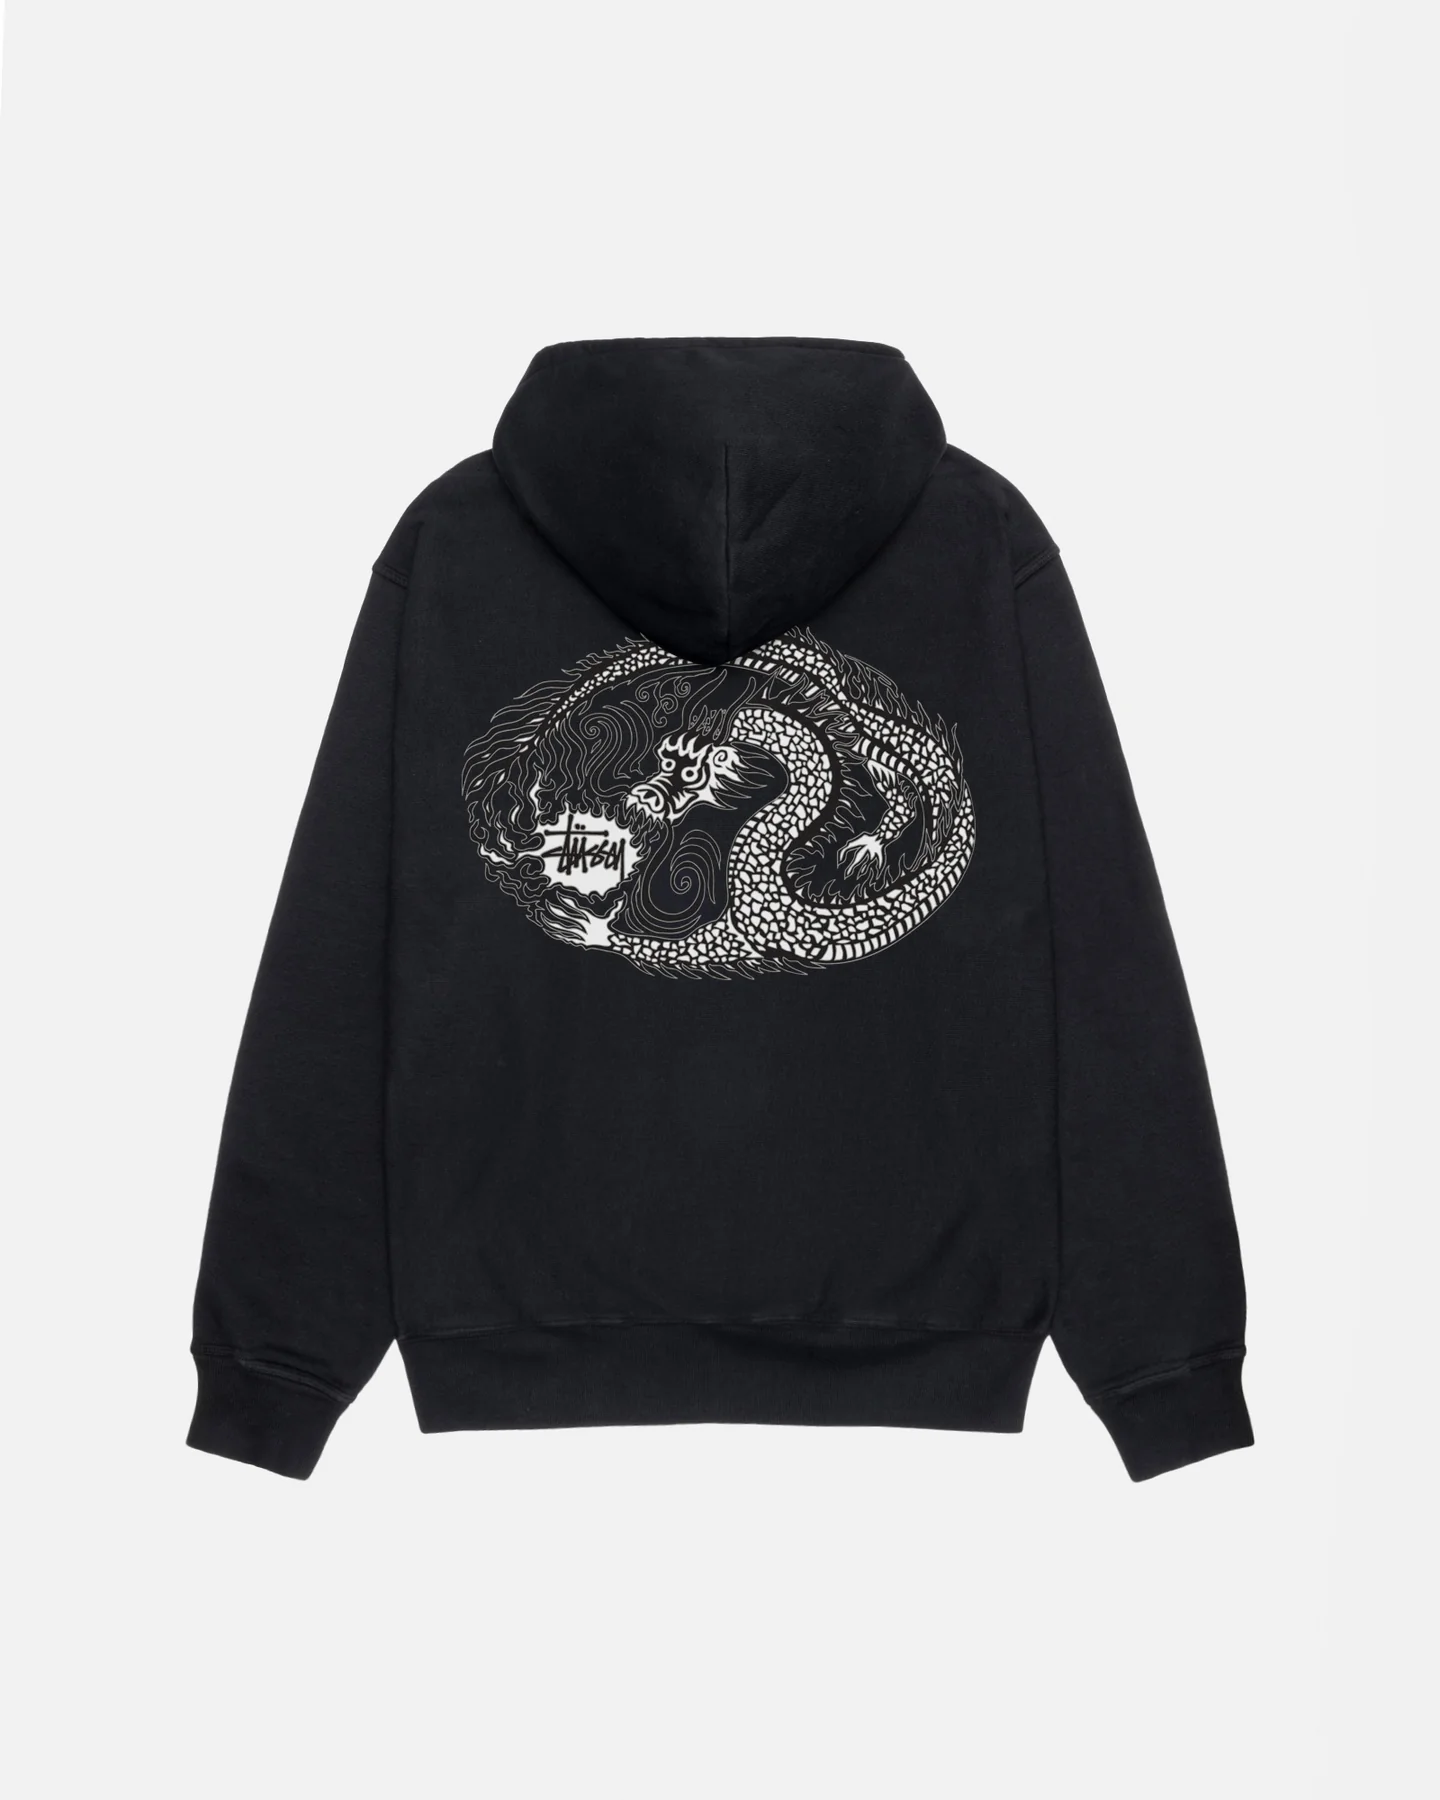 Stussy Ice Cream Hoodie A Timeless Fashion Icon